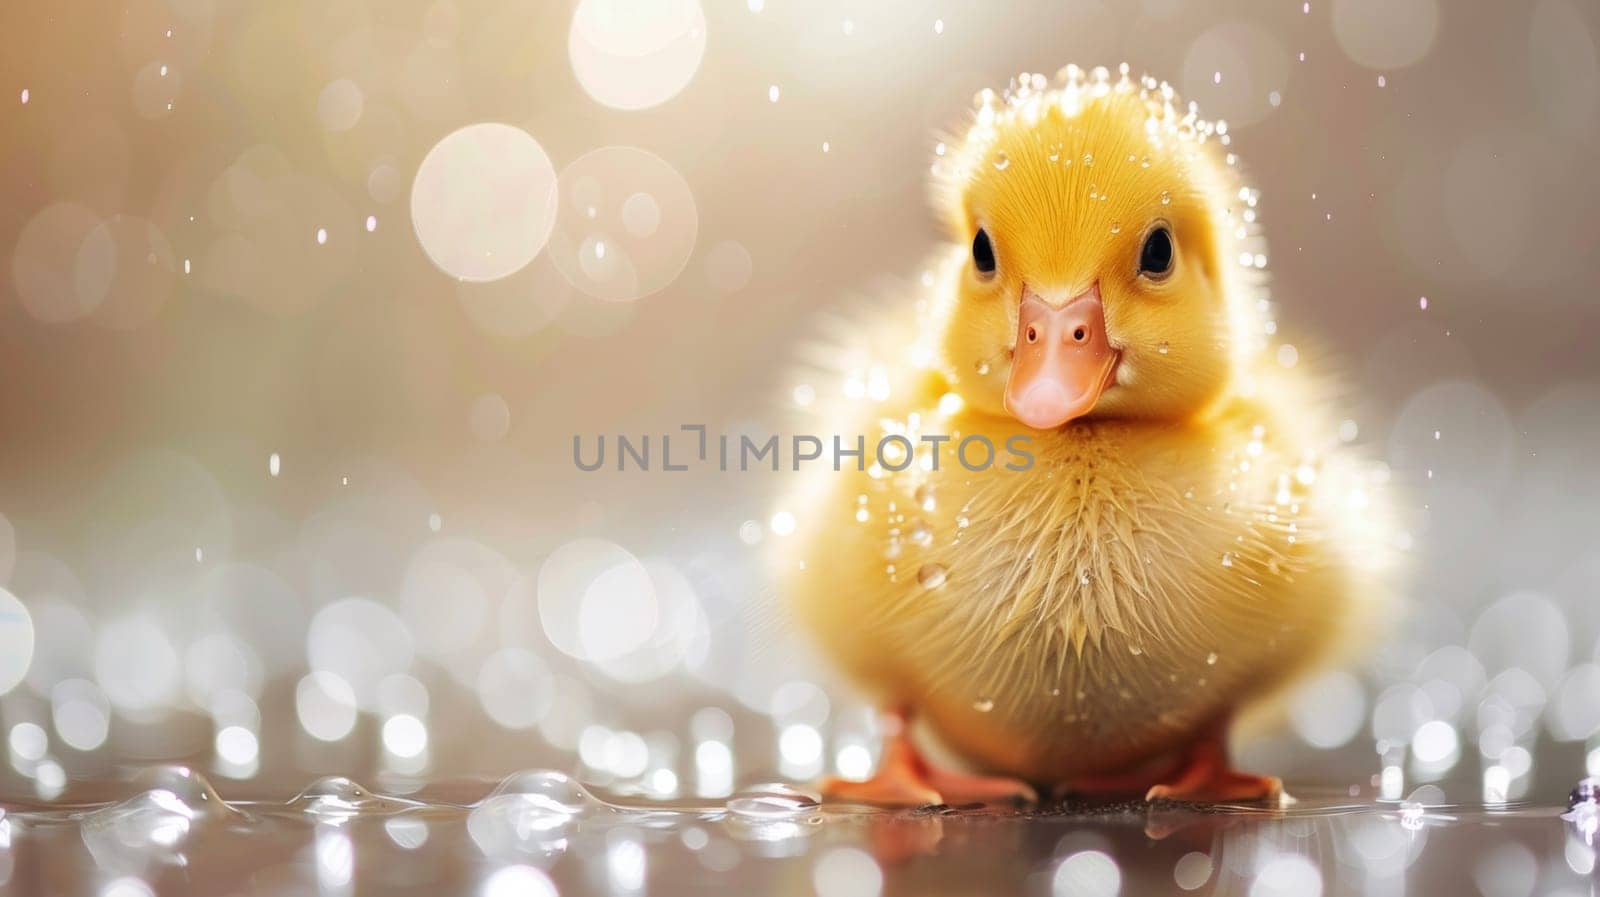 A small yellow duckling sitting on a wet surface with water droplets